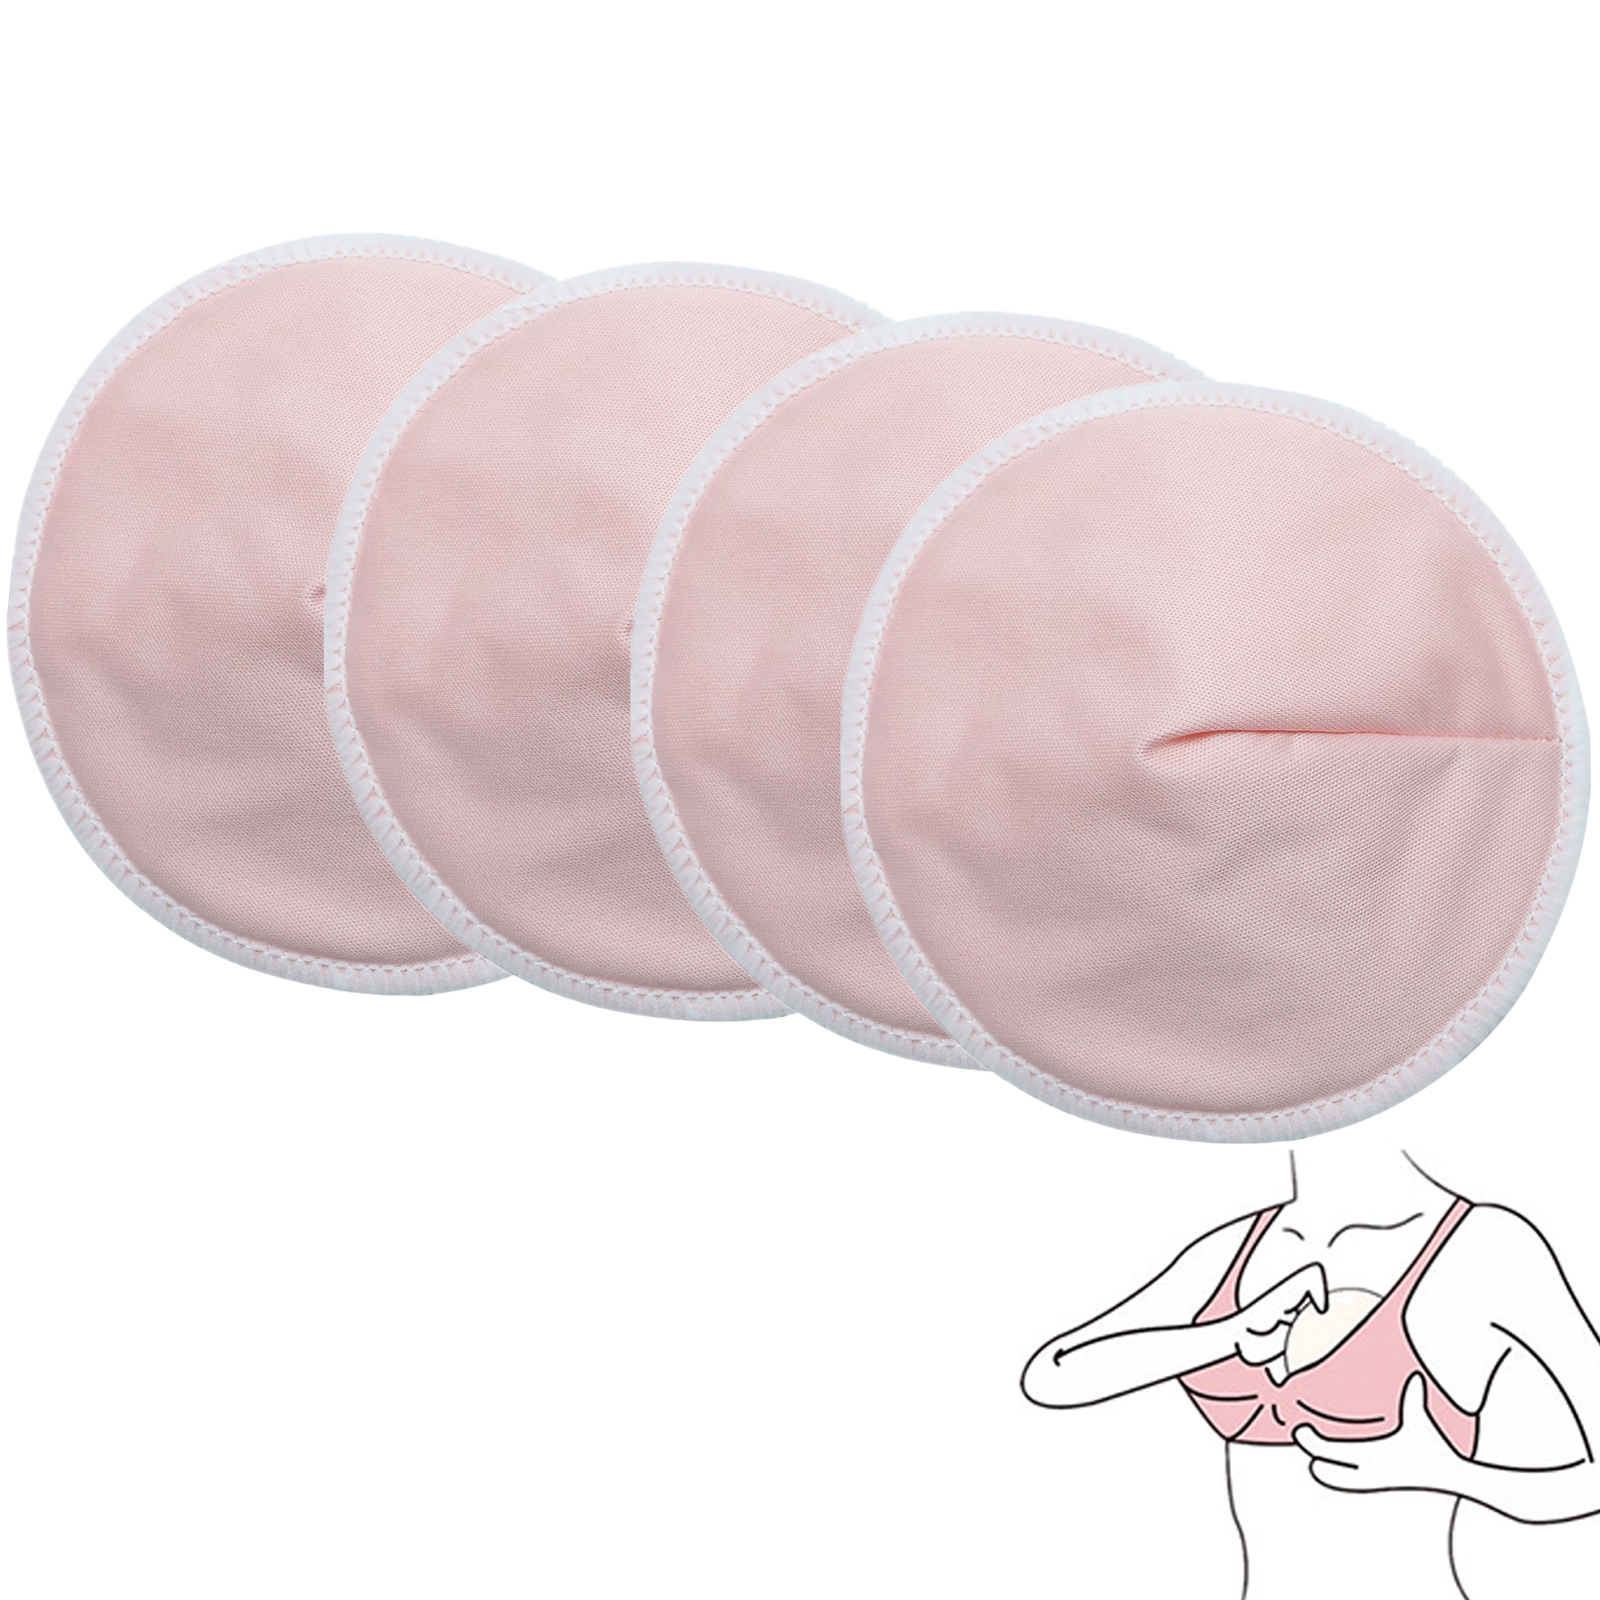 2pcs Soft Maternity Nursing Breast Pads Reusable 3 layers Cotton Washable  Anti Overflow Breastfeeding Pads For Maternity Use